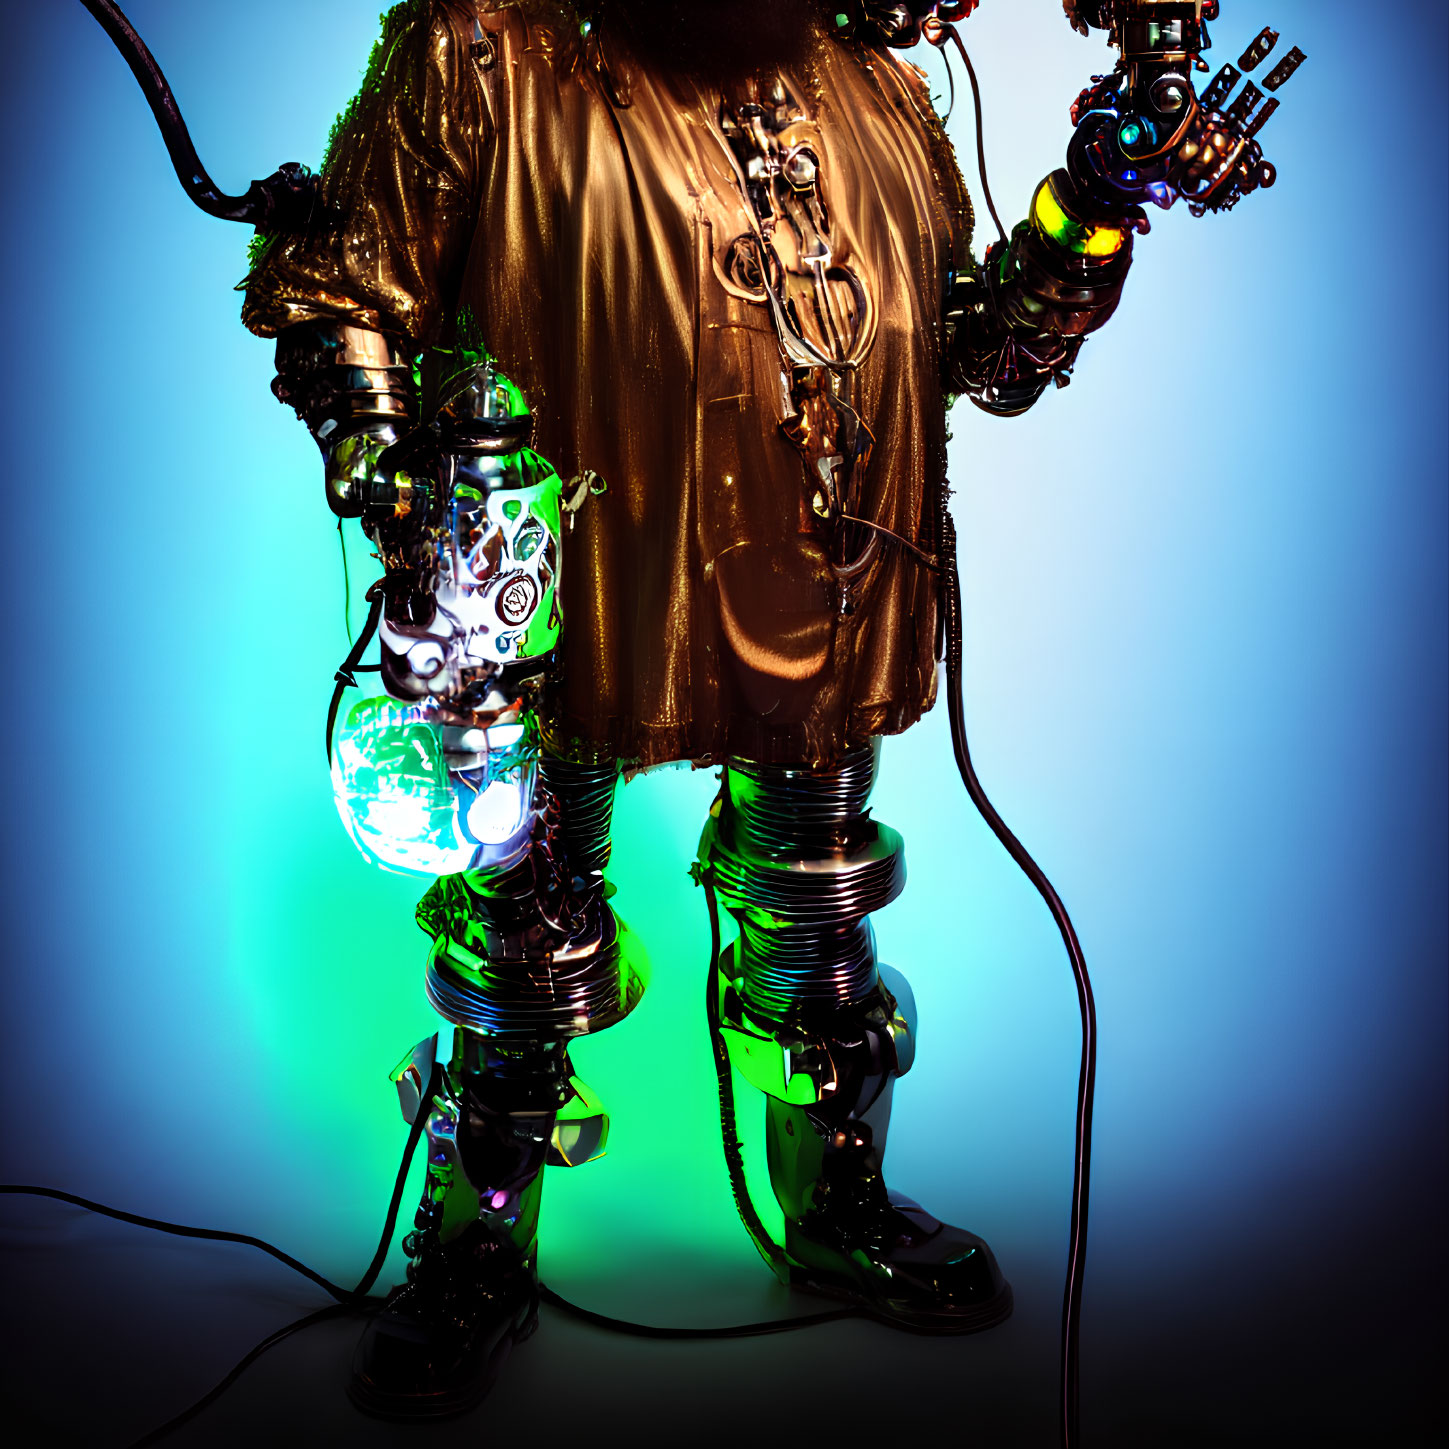 Futuristic steampunk costume with robotic limbs and vibrant lighting